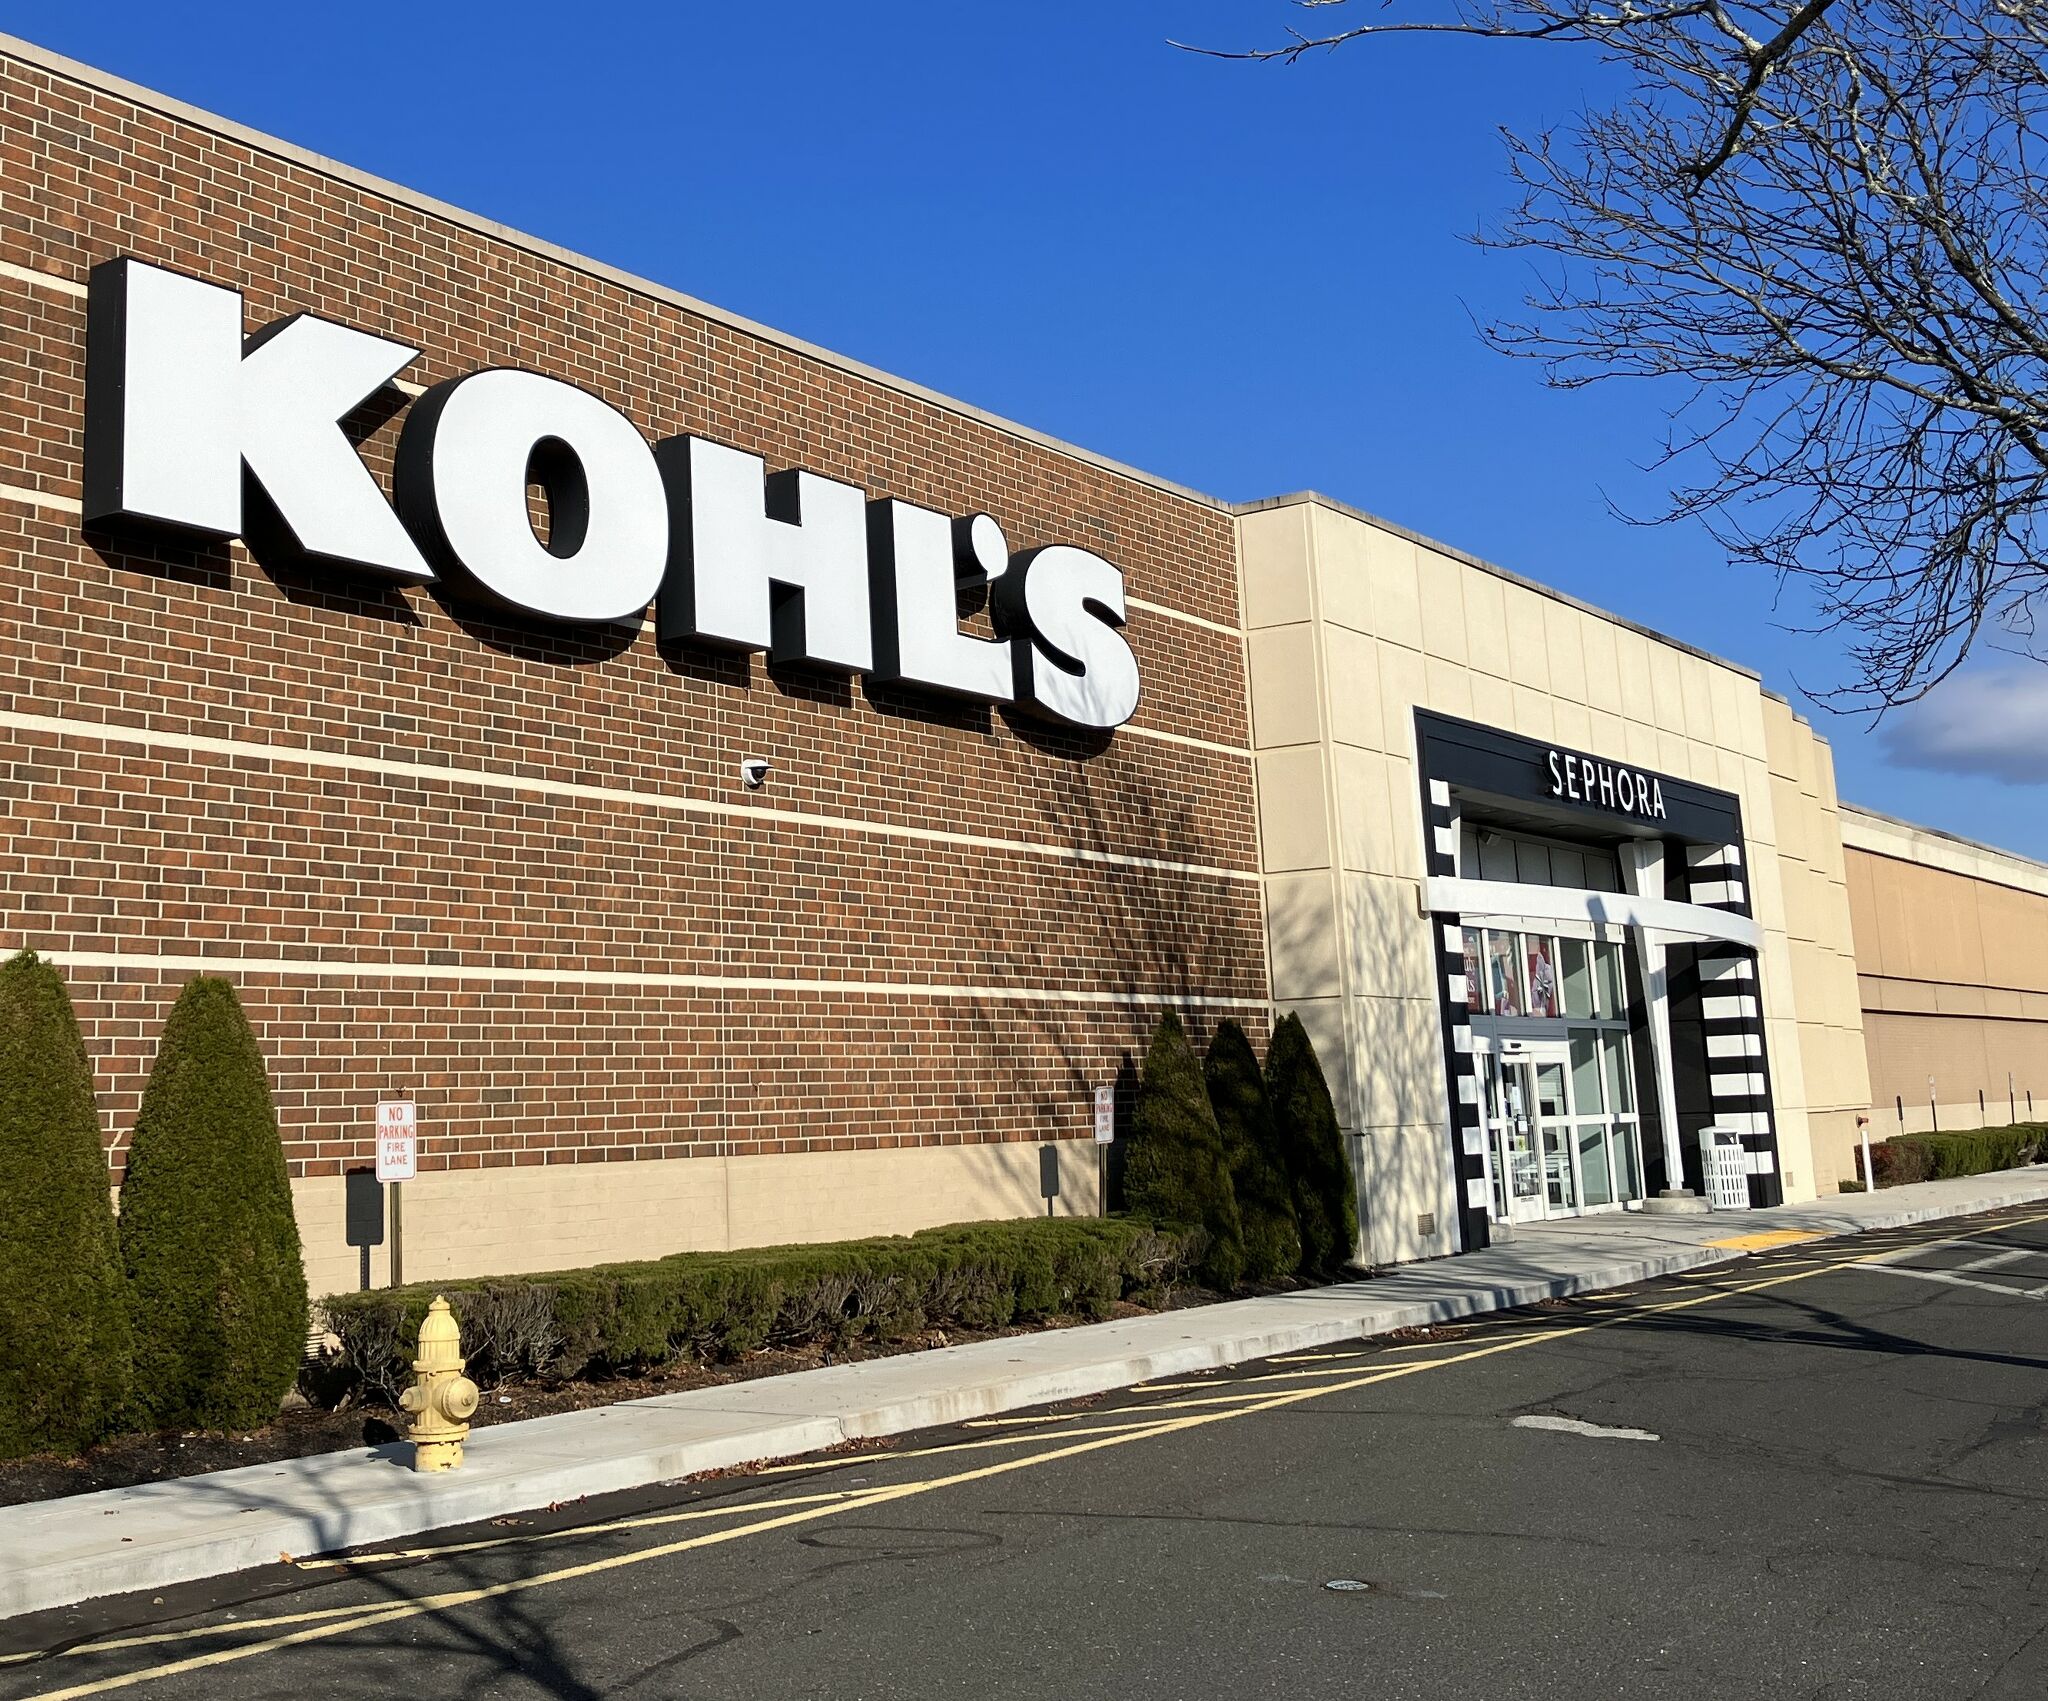 Kohl's partners with lifestyle brand PopSugar to target millennial shoppers